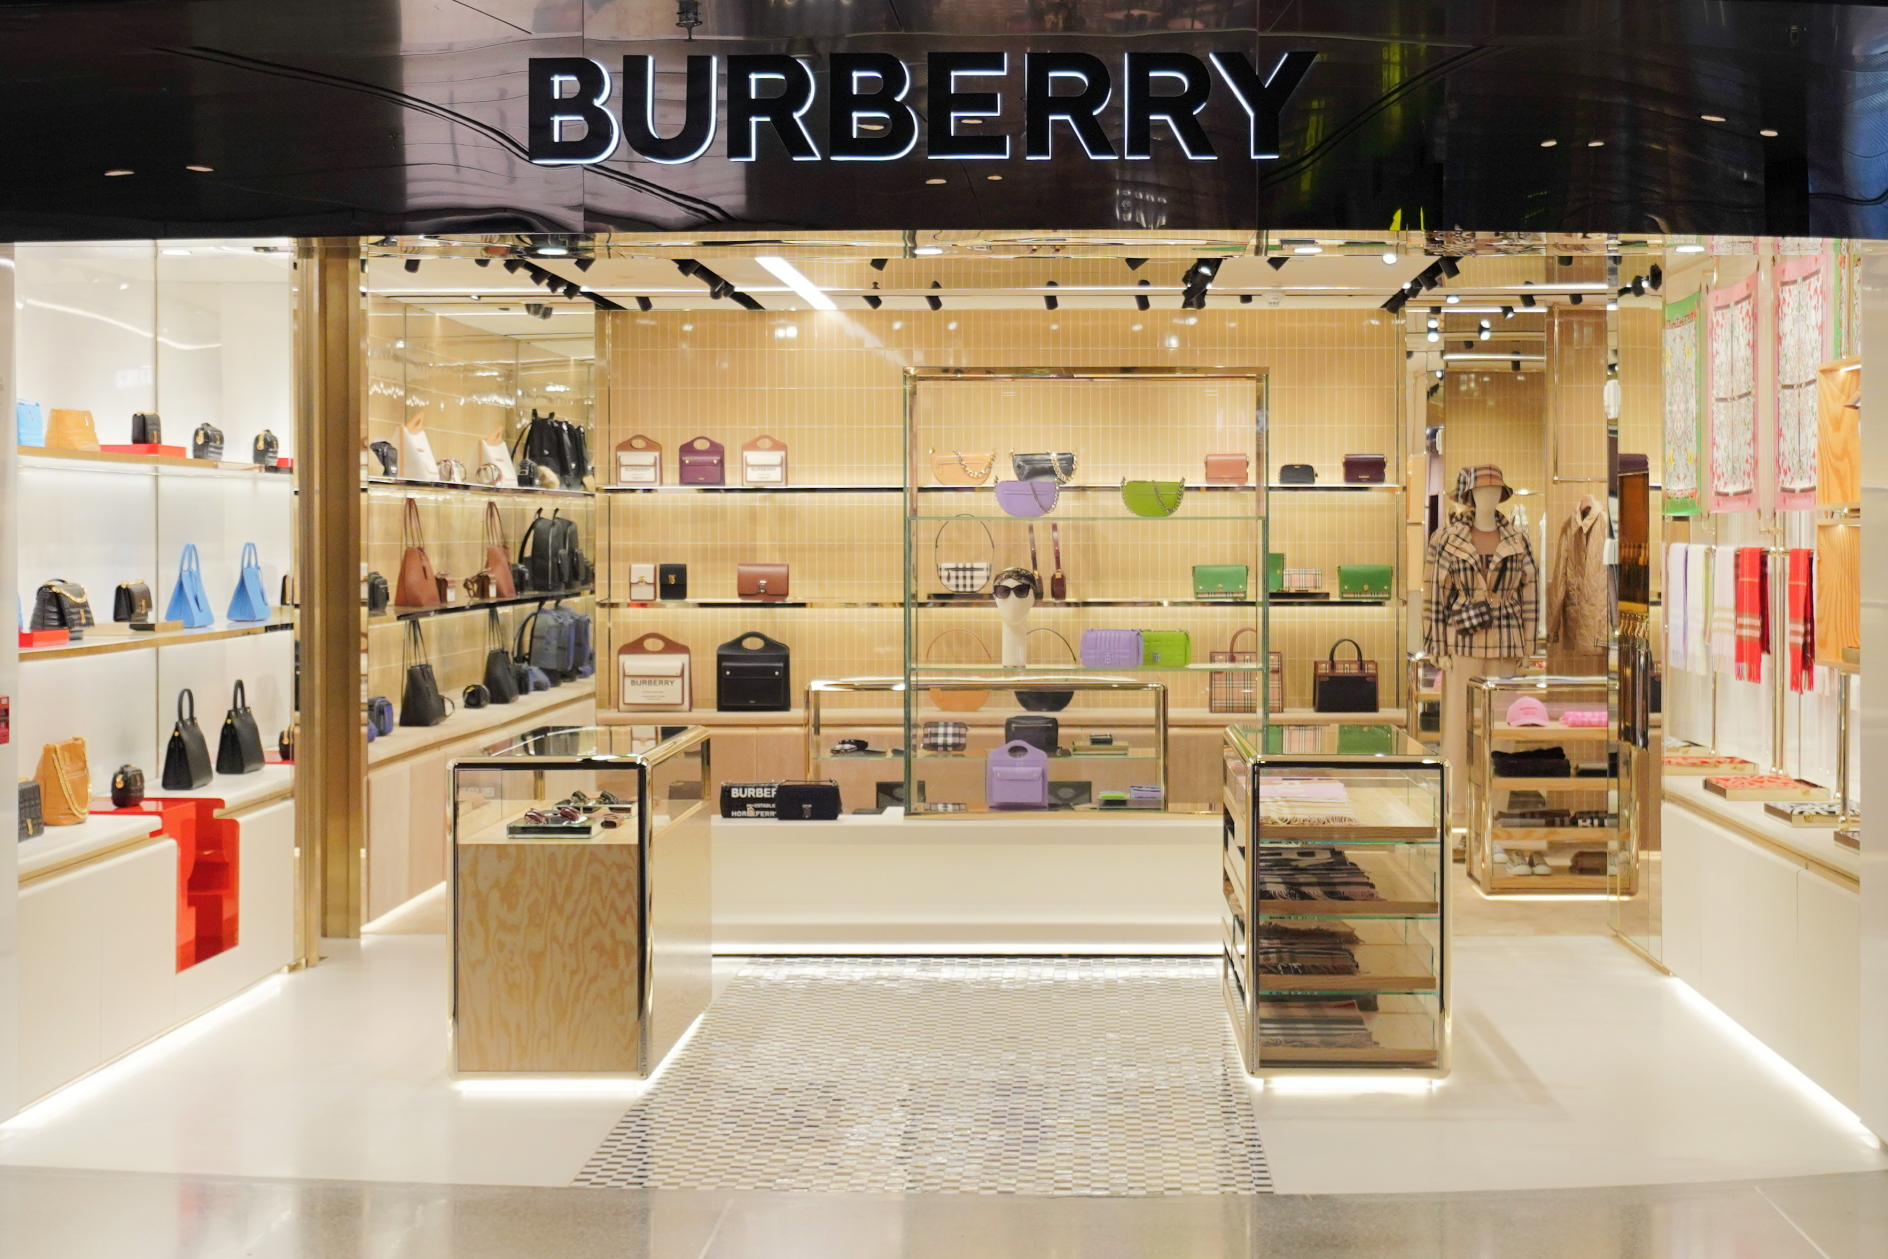 Burberry Opens Qatar Duty Free Outlet at HIA